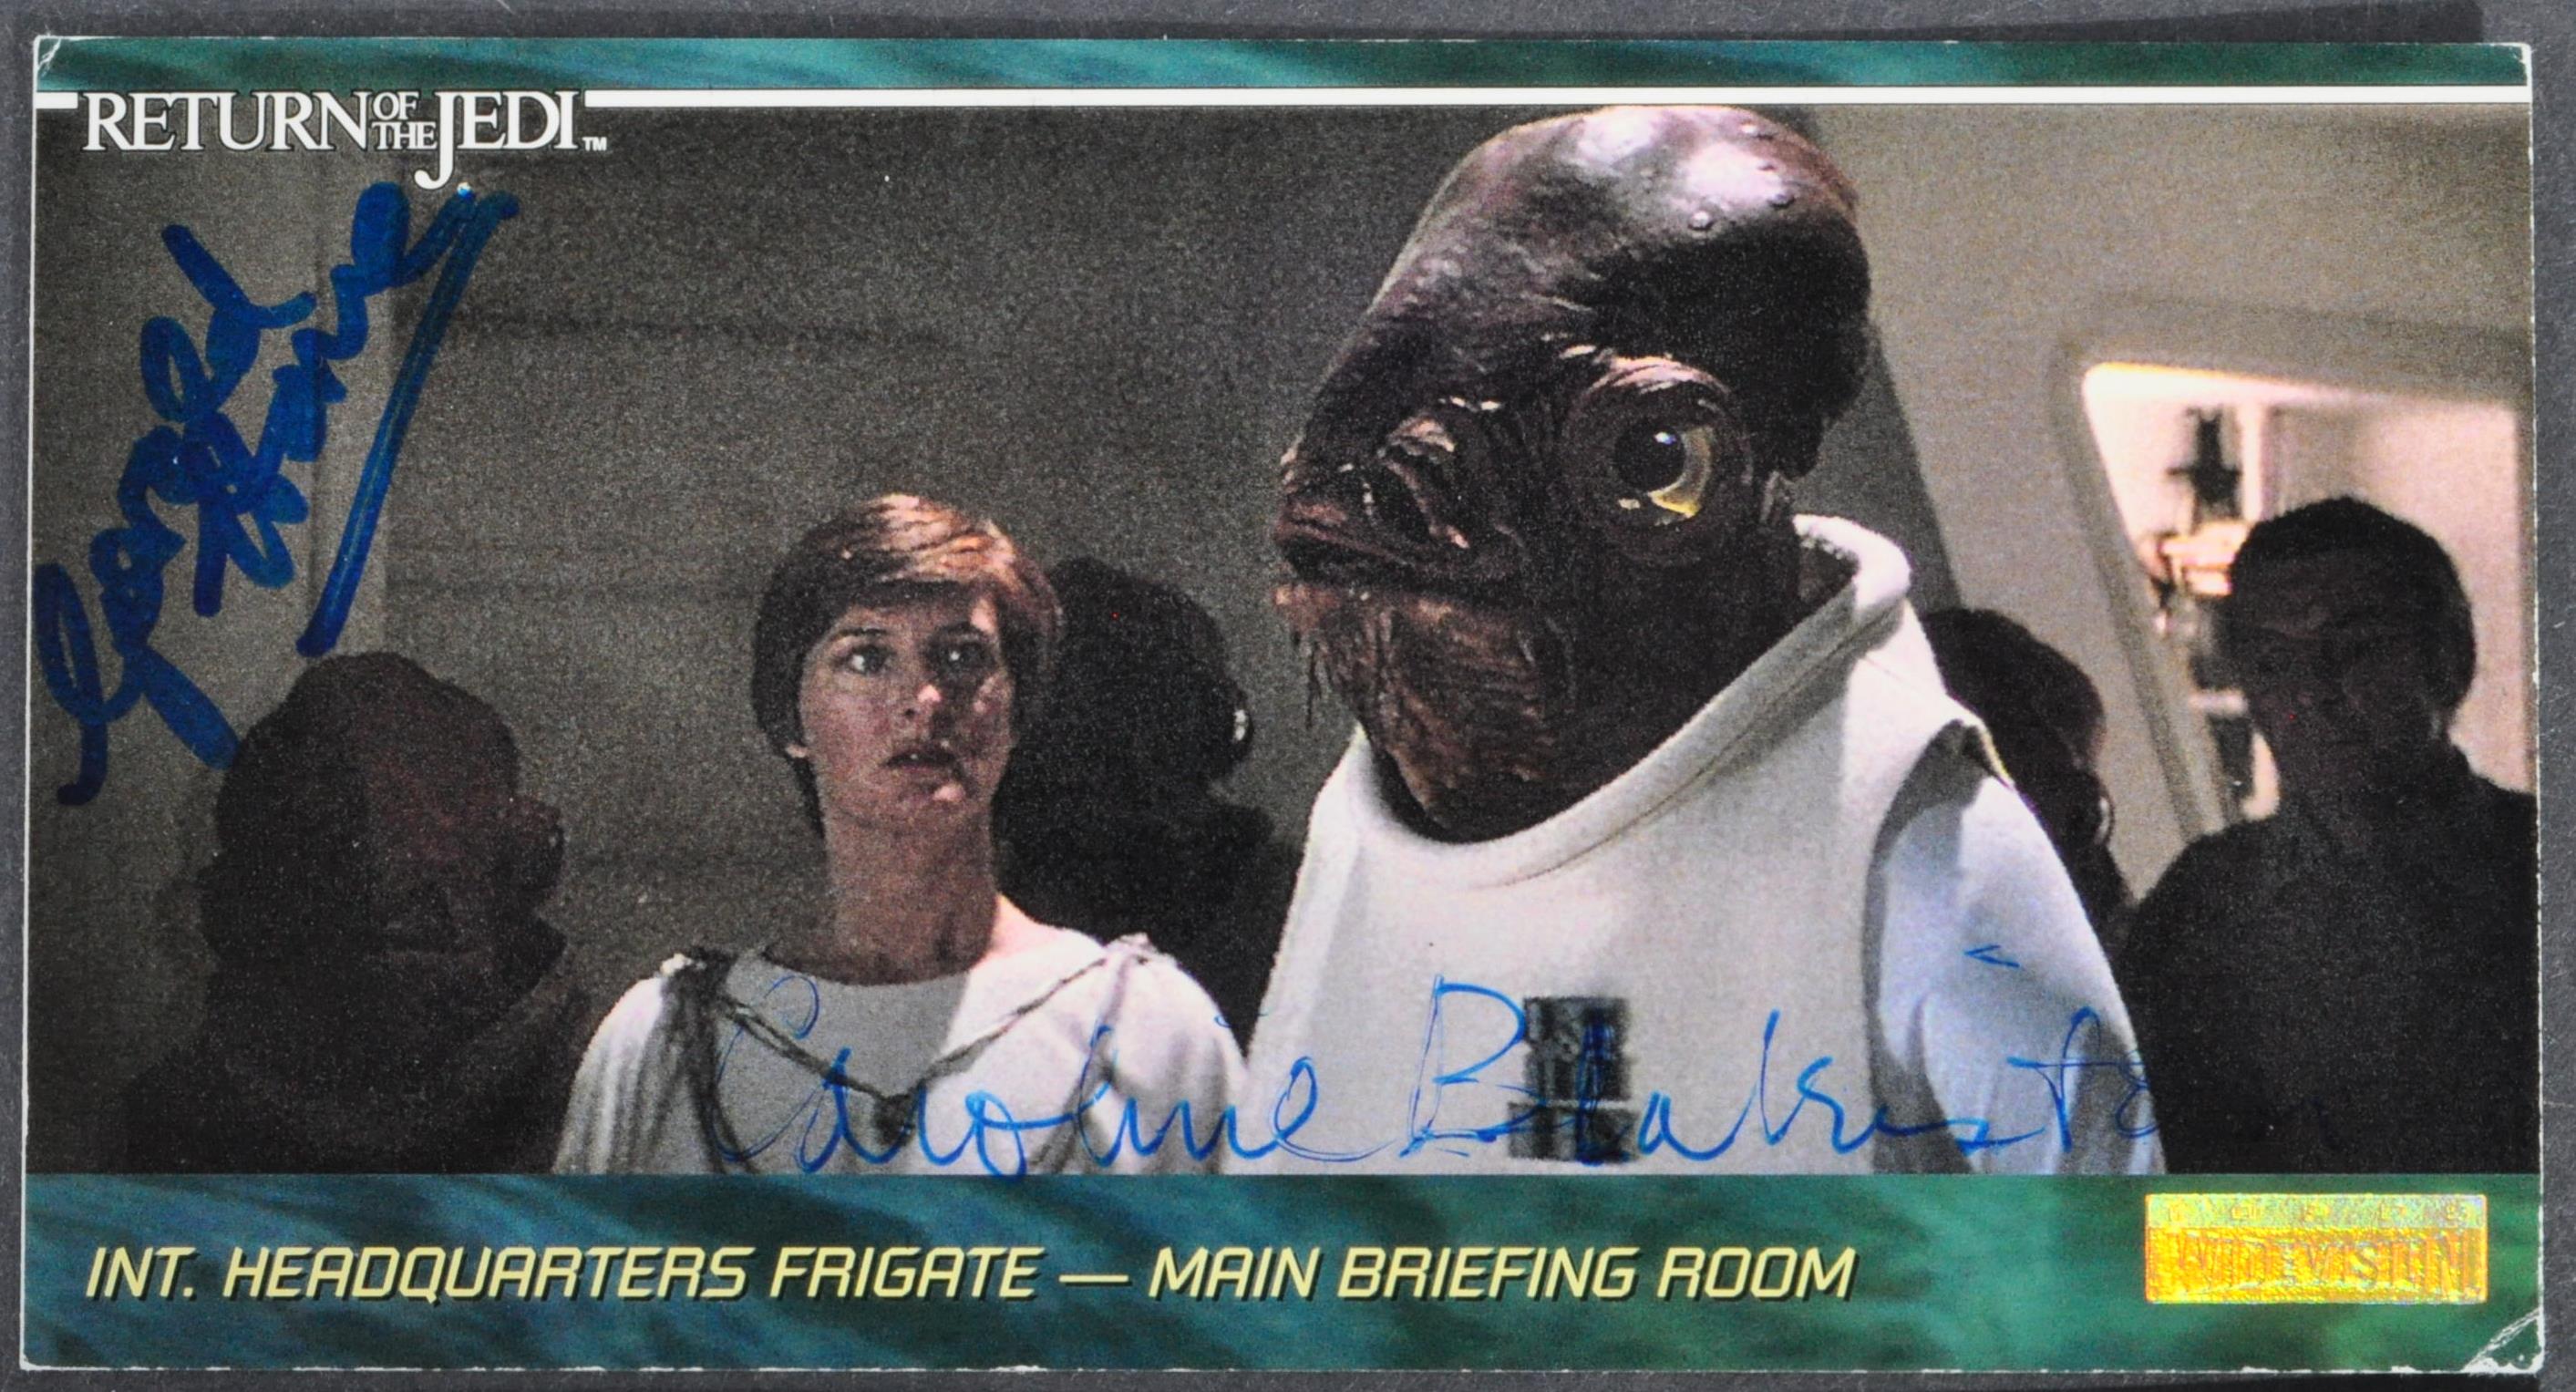 STAR WARS - ROTJ - REBELS MULTI-SIGNED TOPPS TRADING CARDS - Image 2 of 3